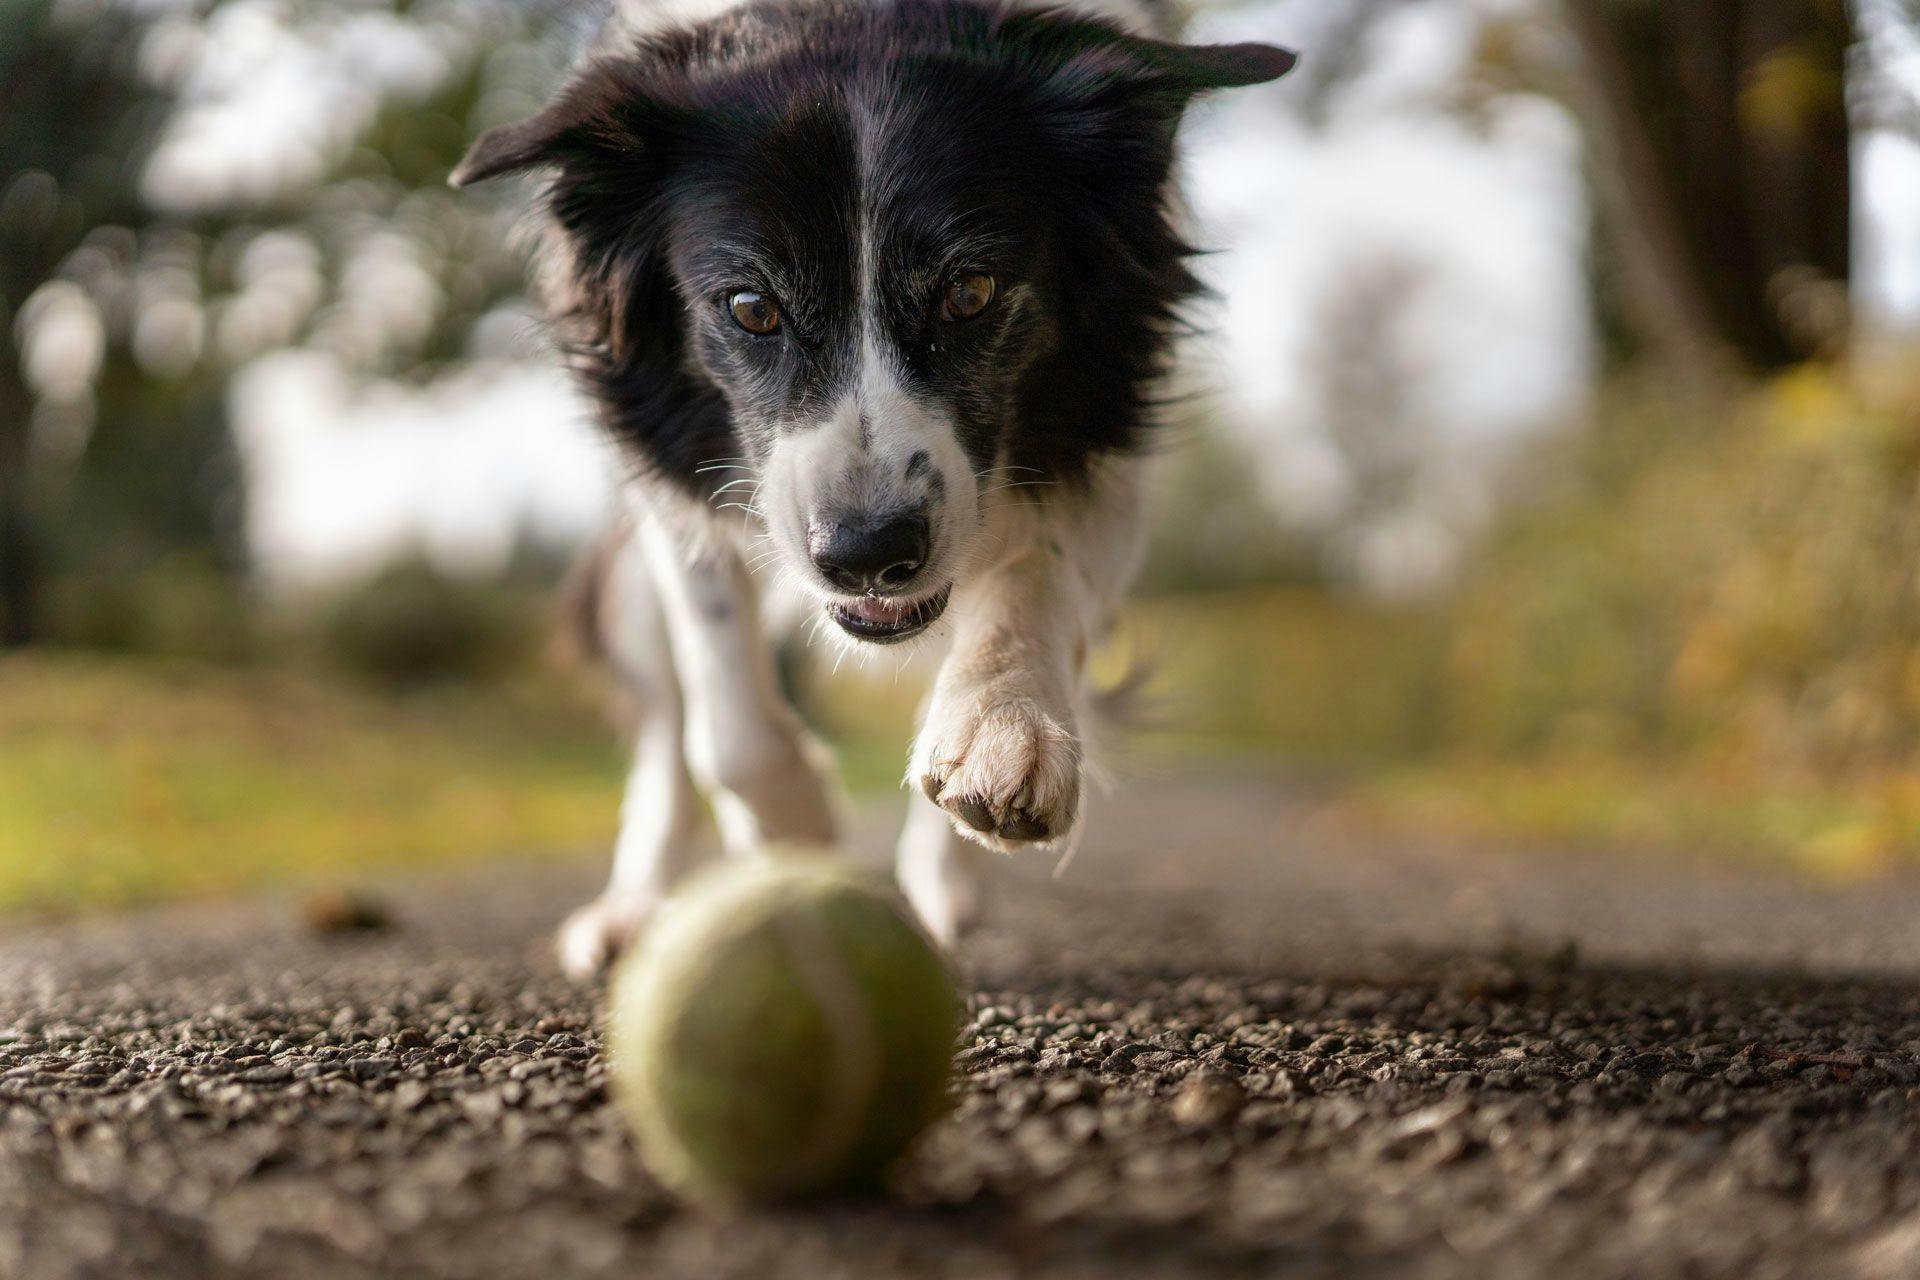 a black and white dog chasing a tennis ball at the park